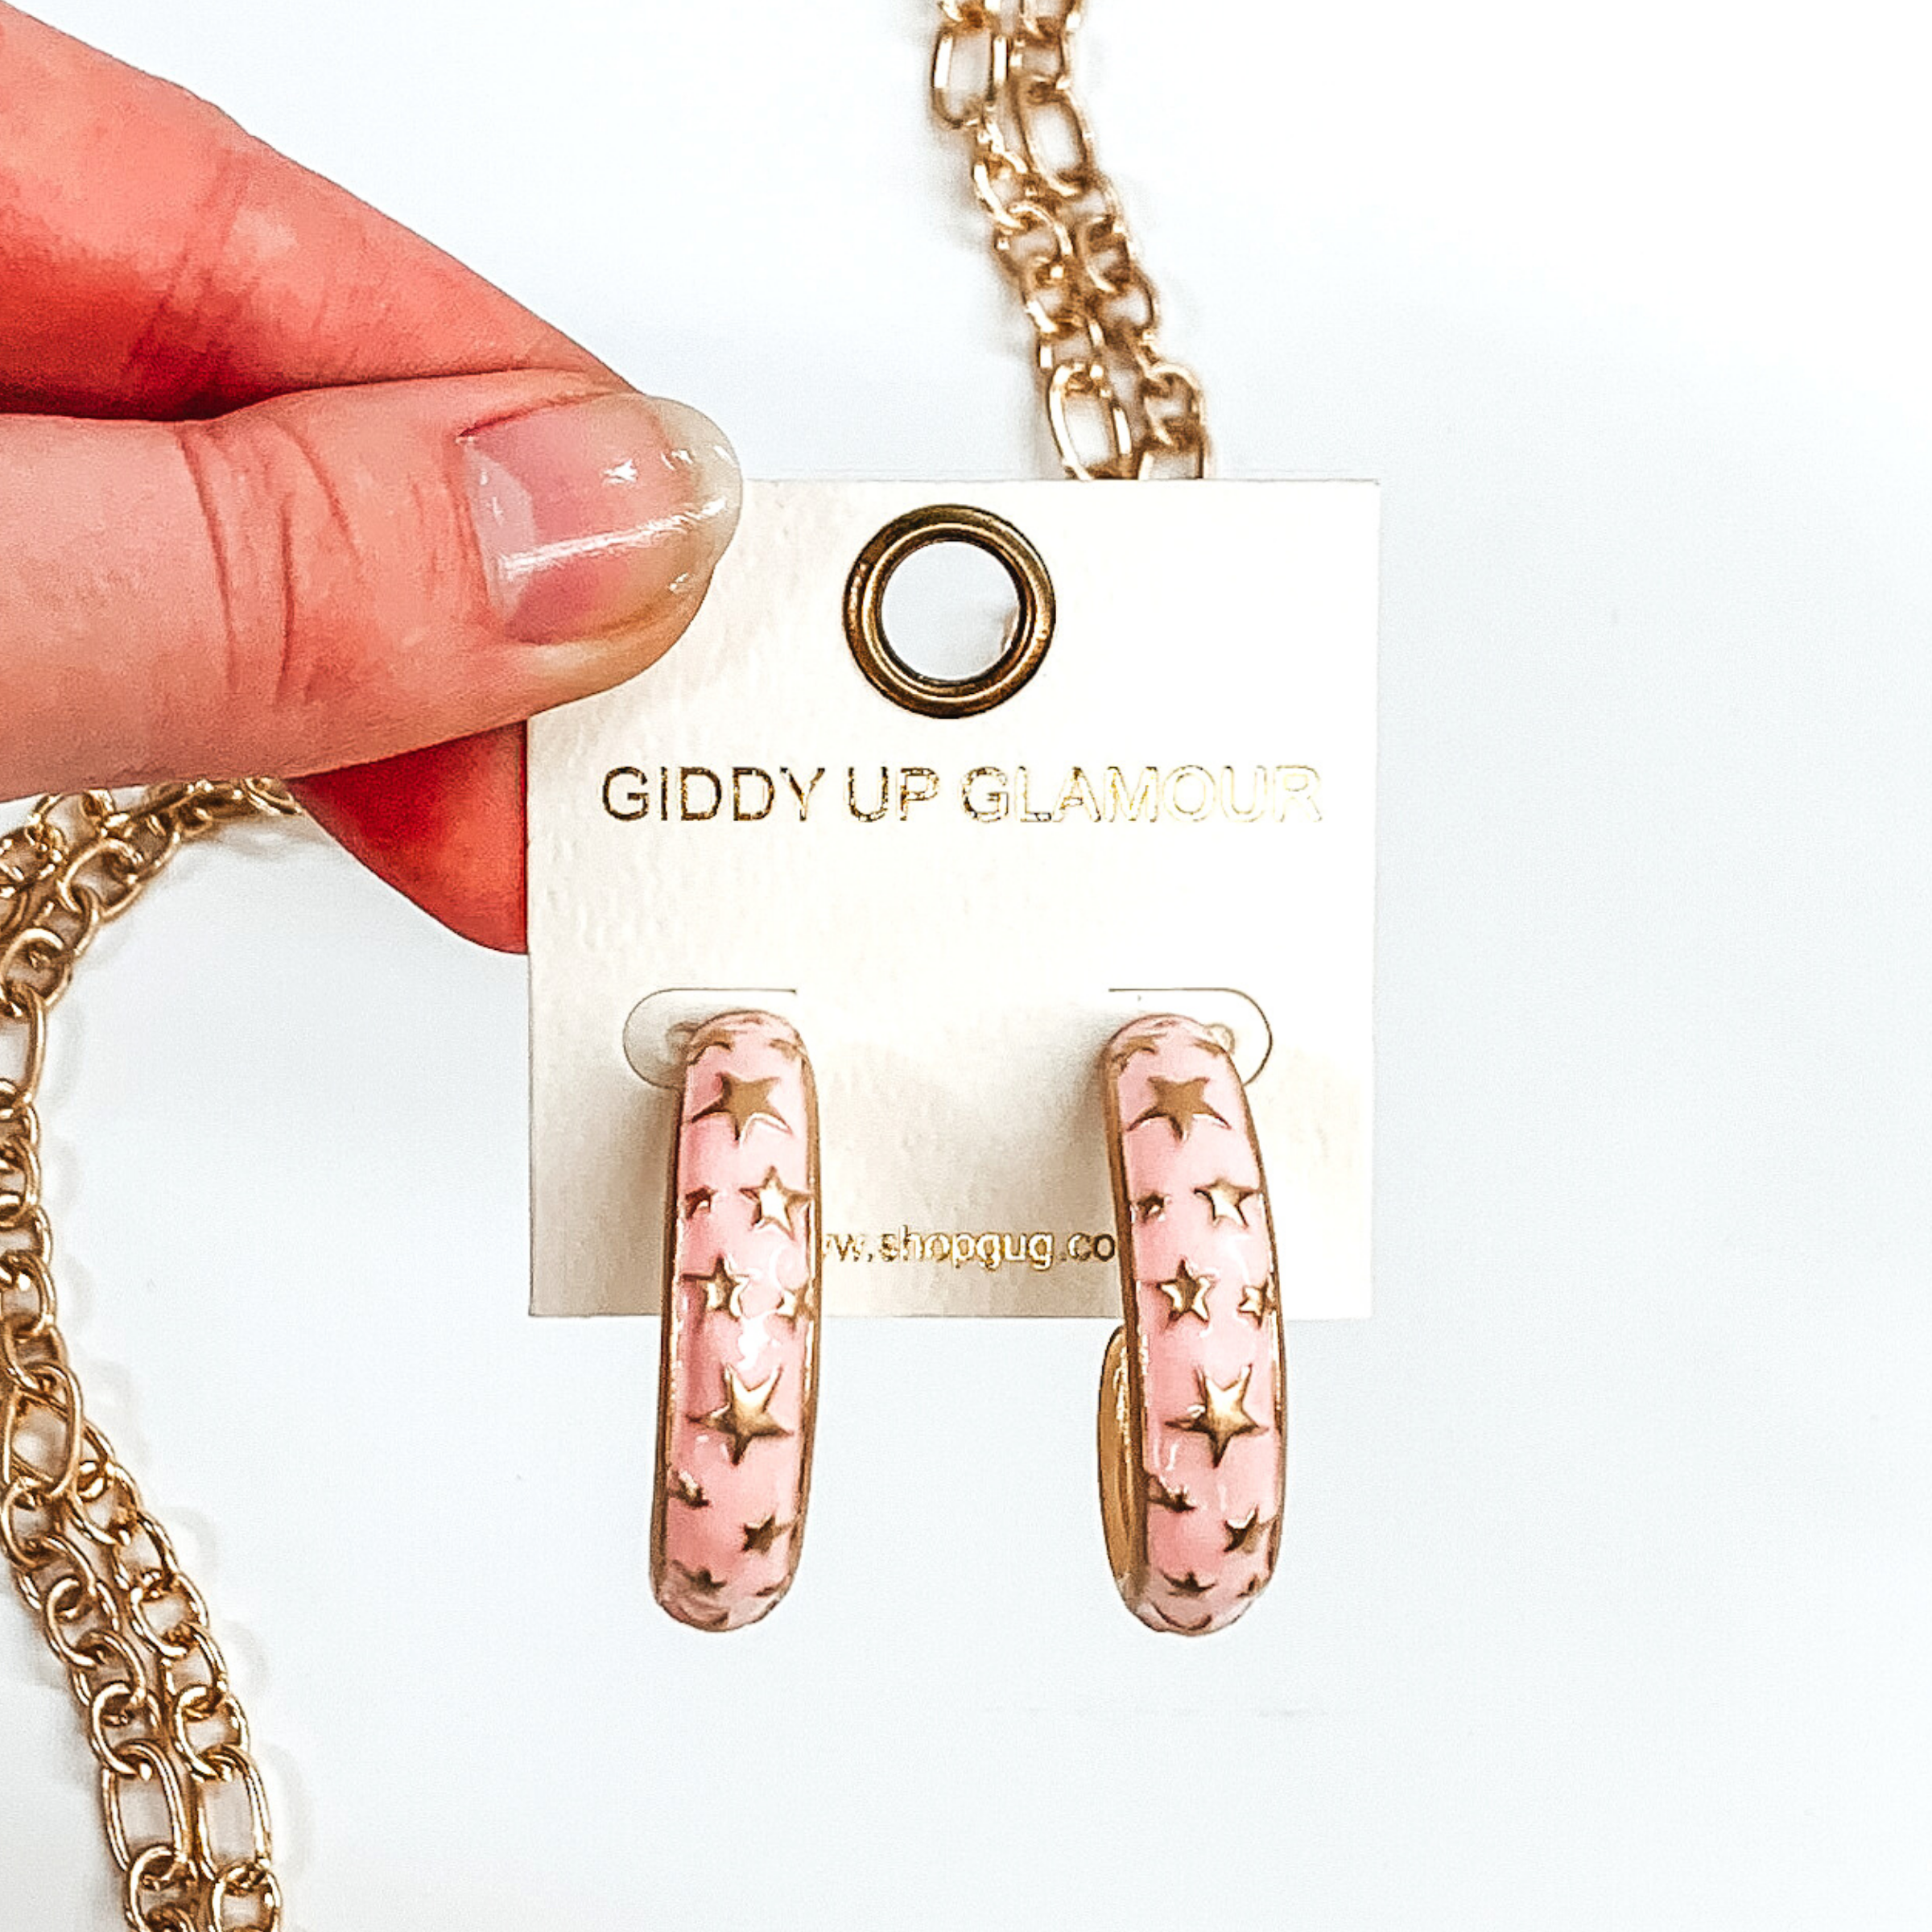 Thick, rounded light pink hoop earrings with gold outlined and gold star pattern. These earrings are on a white earring holder held by fingers on a white background that has gold chained decor. 